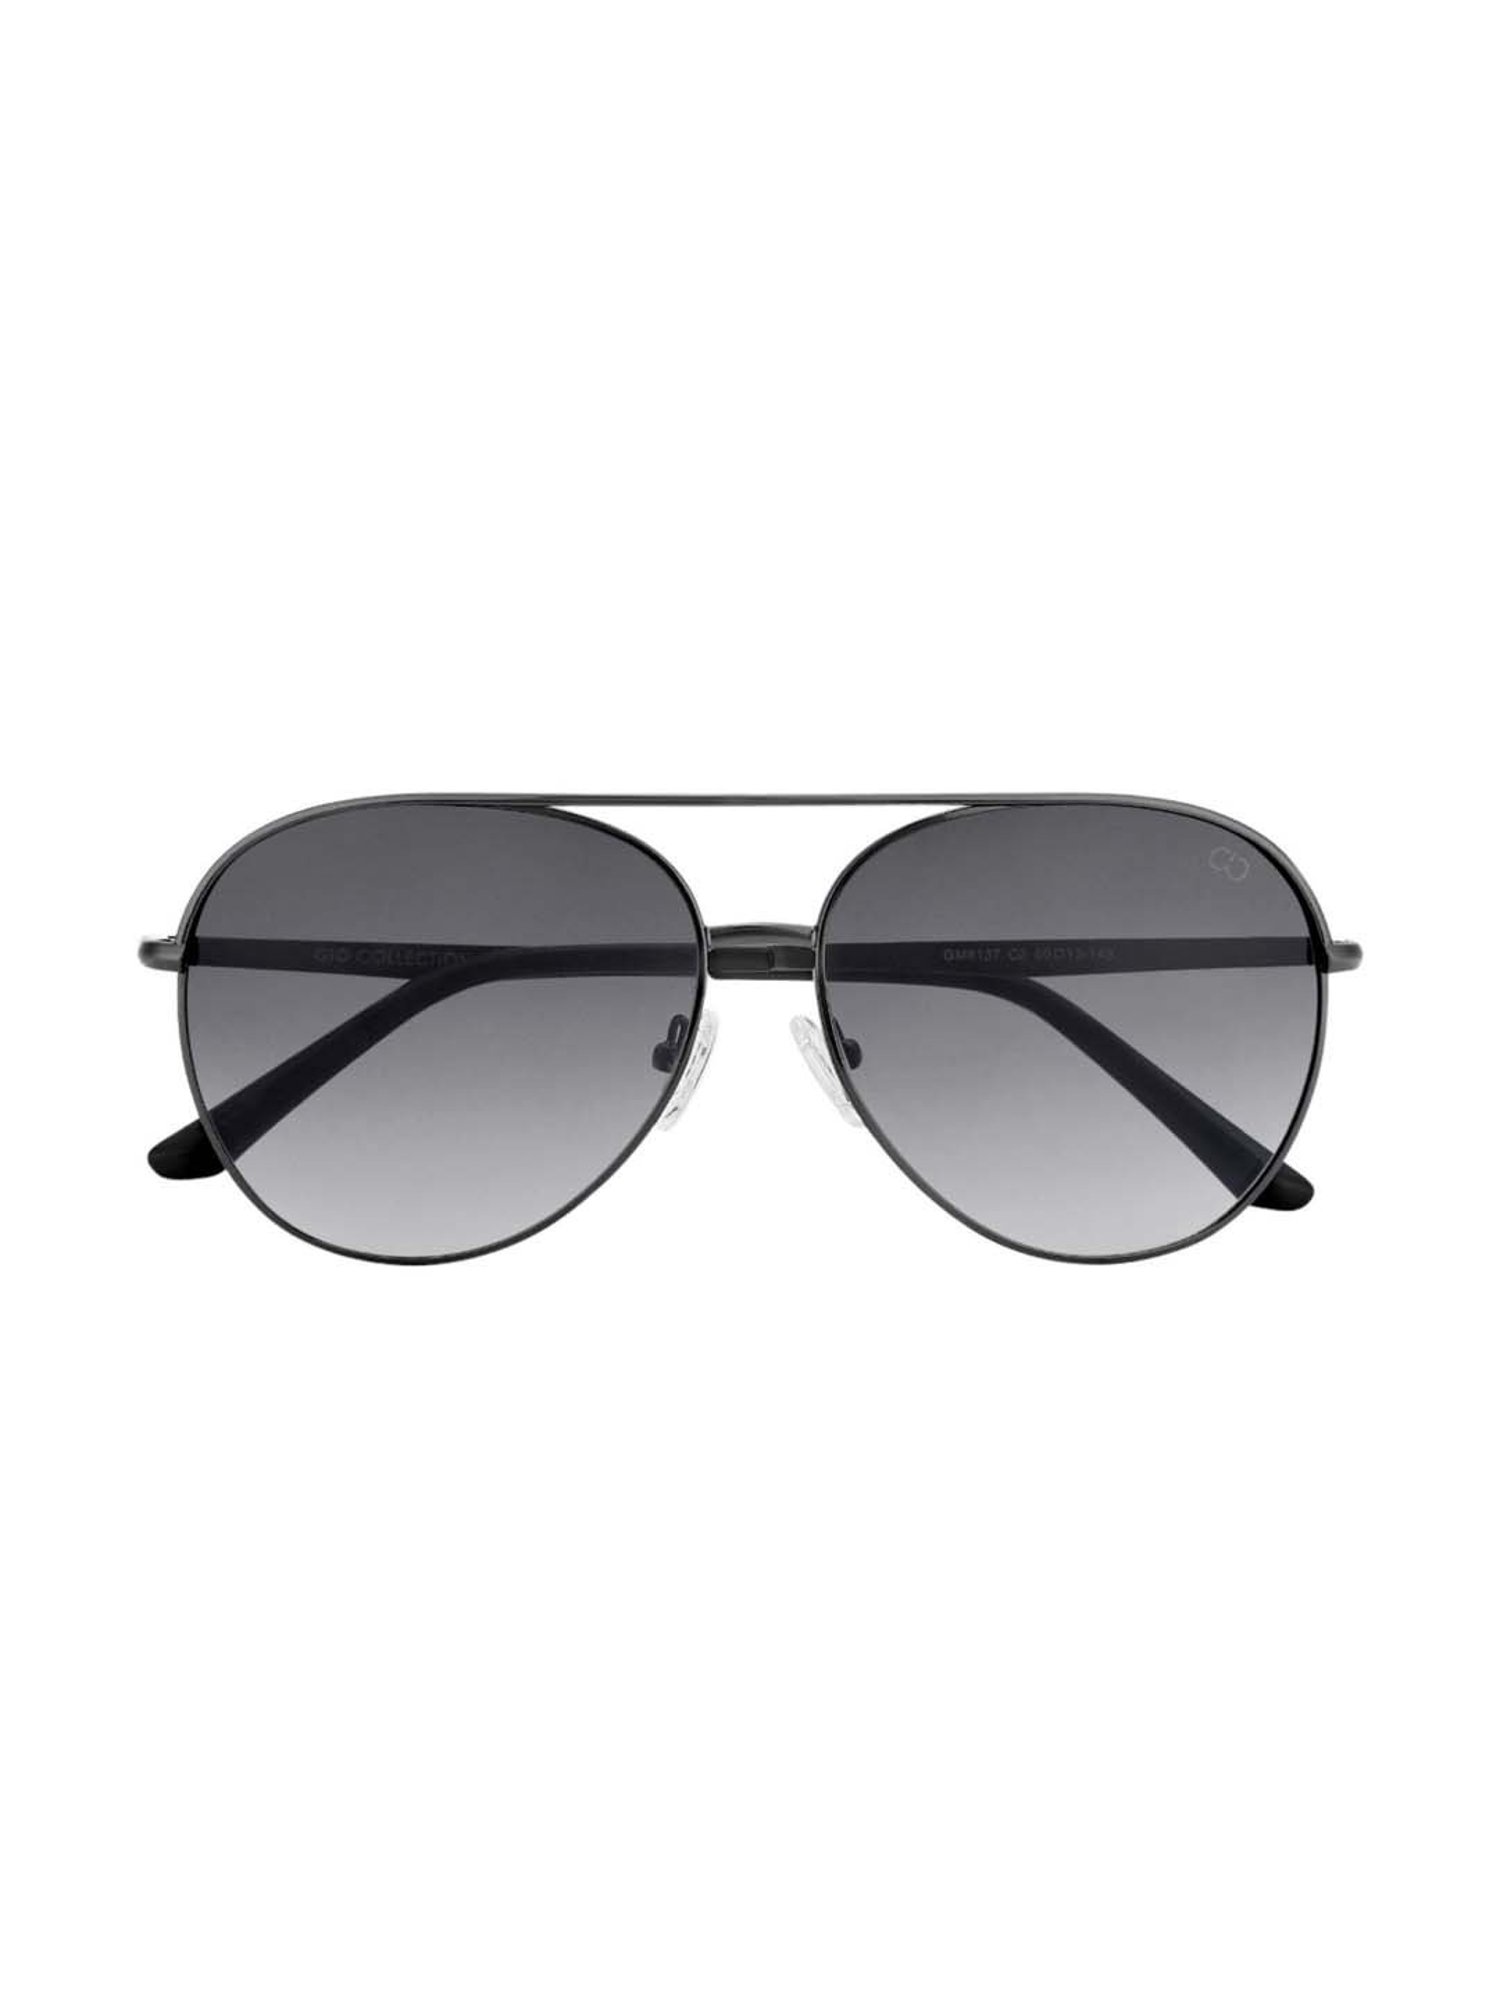 Buy Gio Collection UV Protected Aviator Women's Sunglasses - (61 | Grey  Lens) at Amazon.in